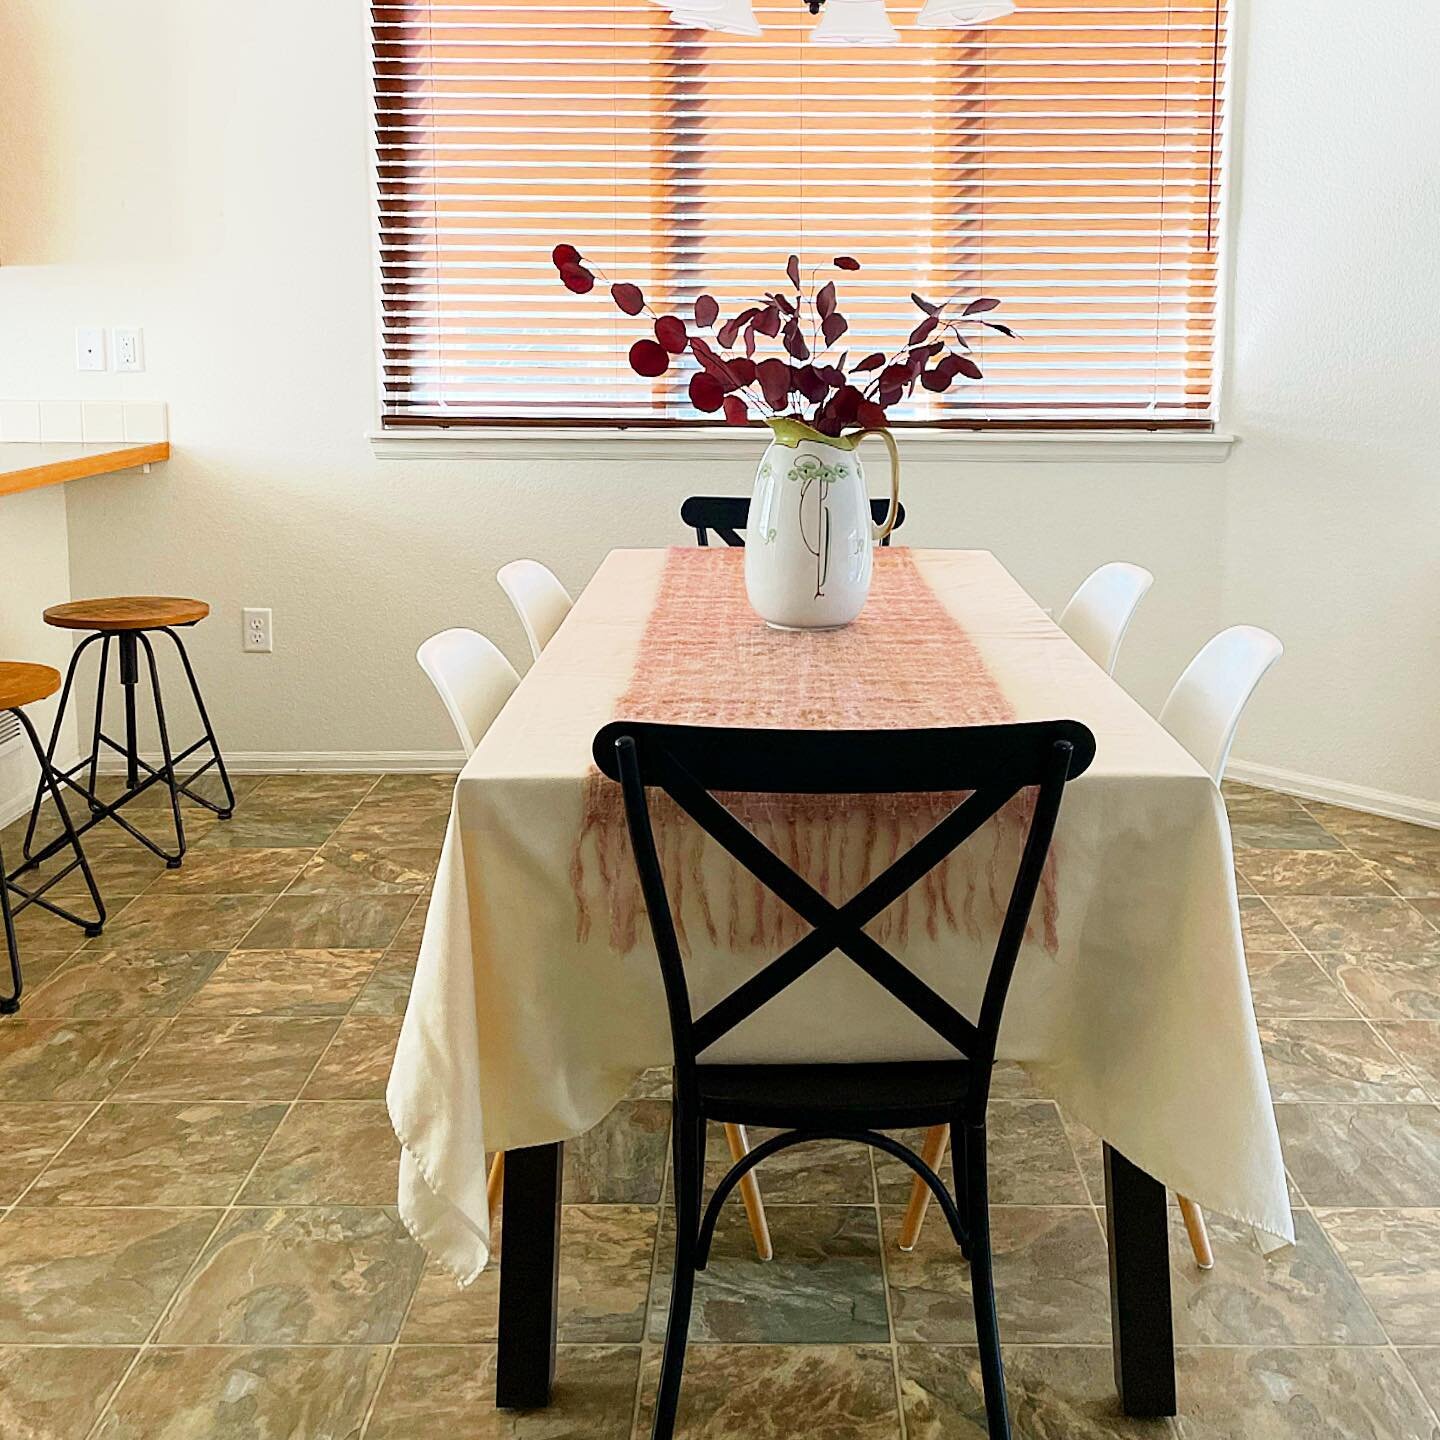 I hope you had a wonderful Thanksgiving surrounded by the ones you love. This sweet little eat-in kitchen that I staged in Wellington is ready for family, friends and fun! Looking for a new place to make new wonderful memories? This could be the plac